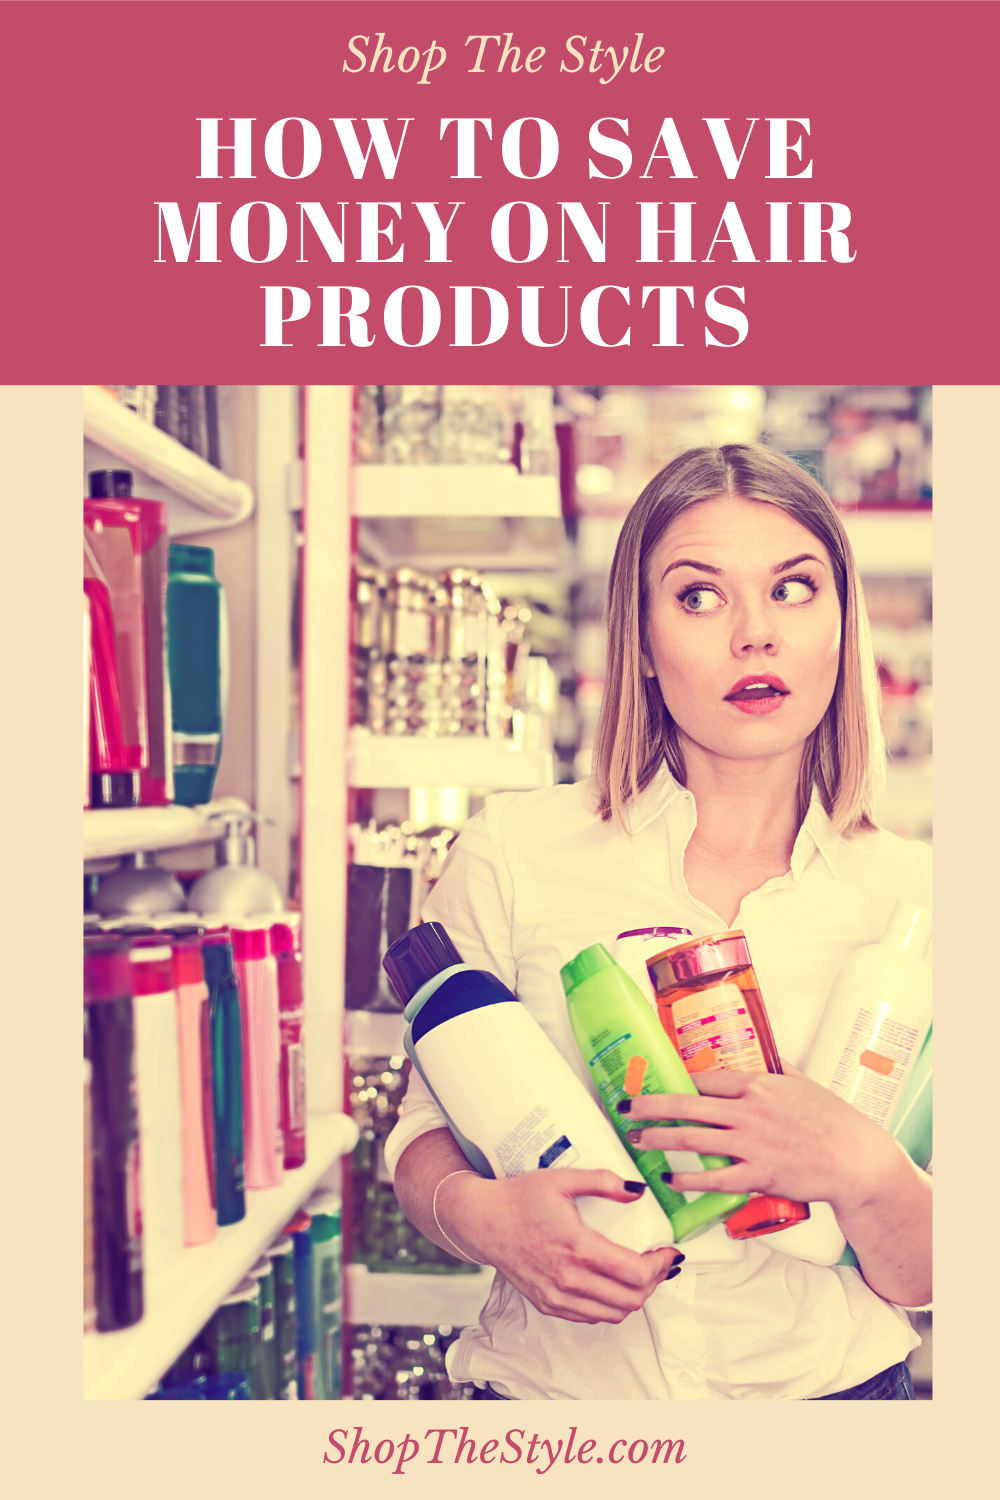 How To Save Money On Hair Products